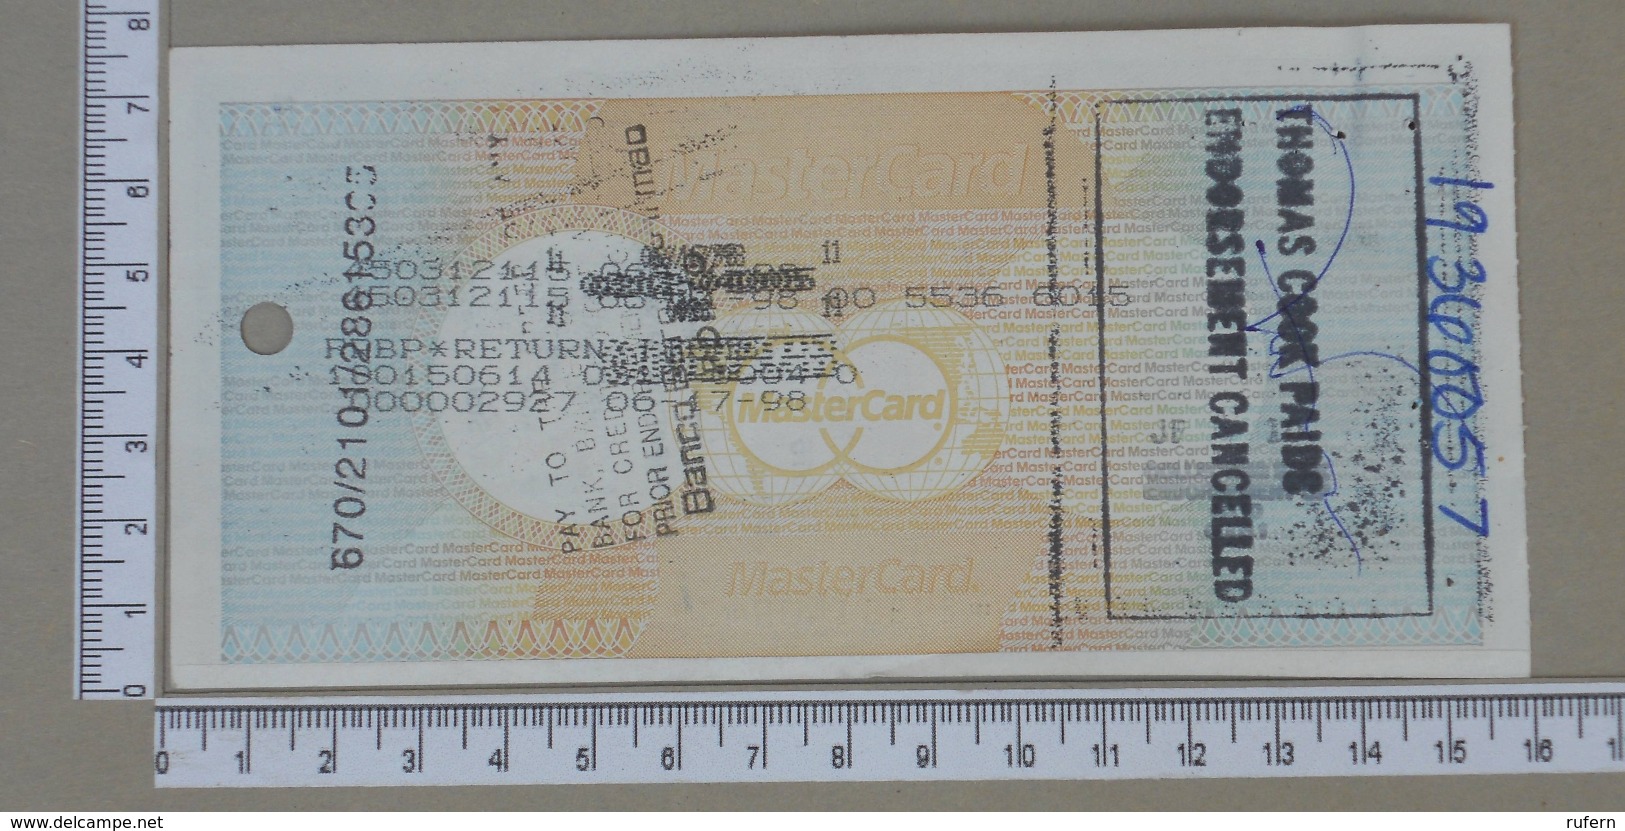 USA 500 DOLLARS  - TRAVELERS CHEQUE MASTER CARD    - (Nº18169) - Cheques & Traveler's Cheques